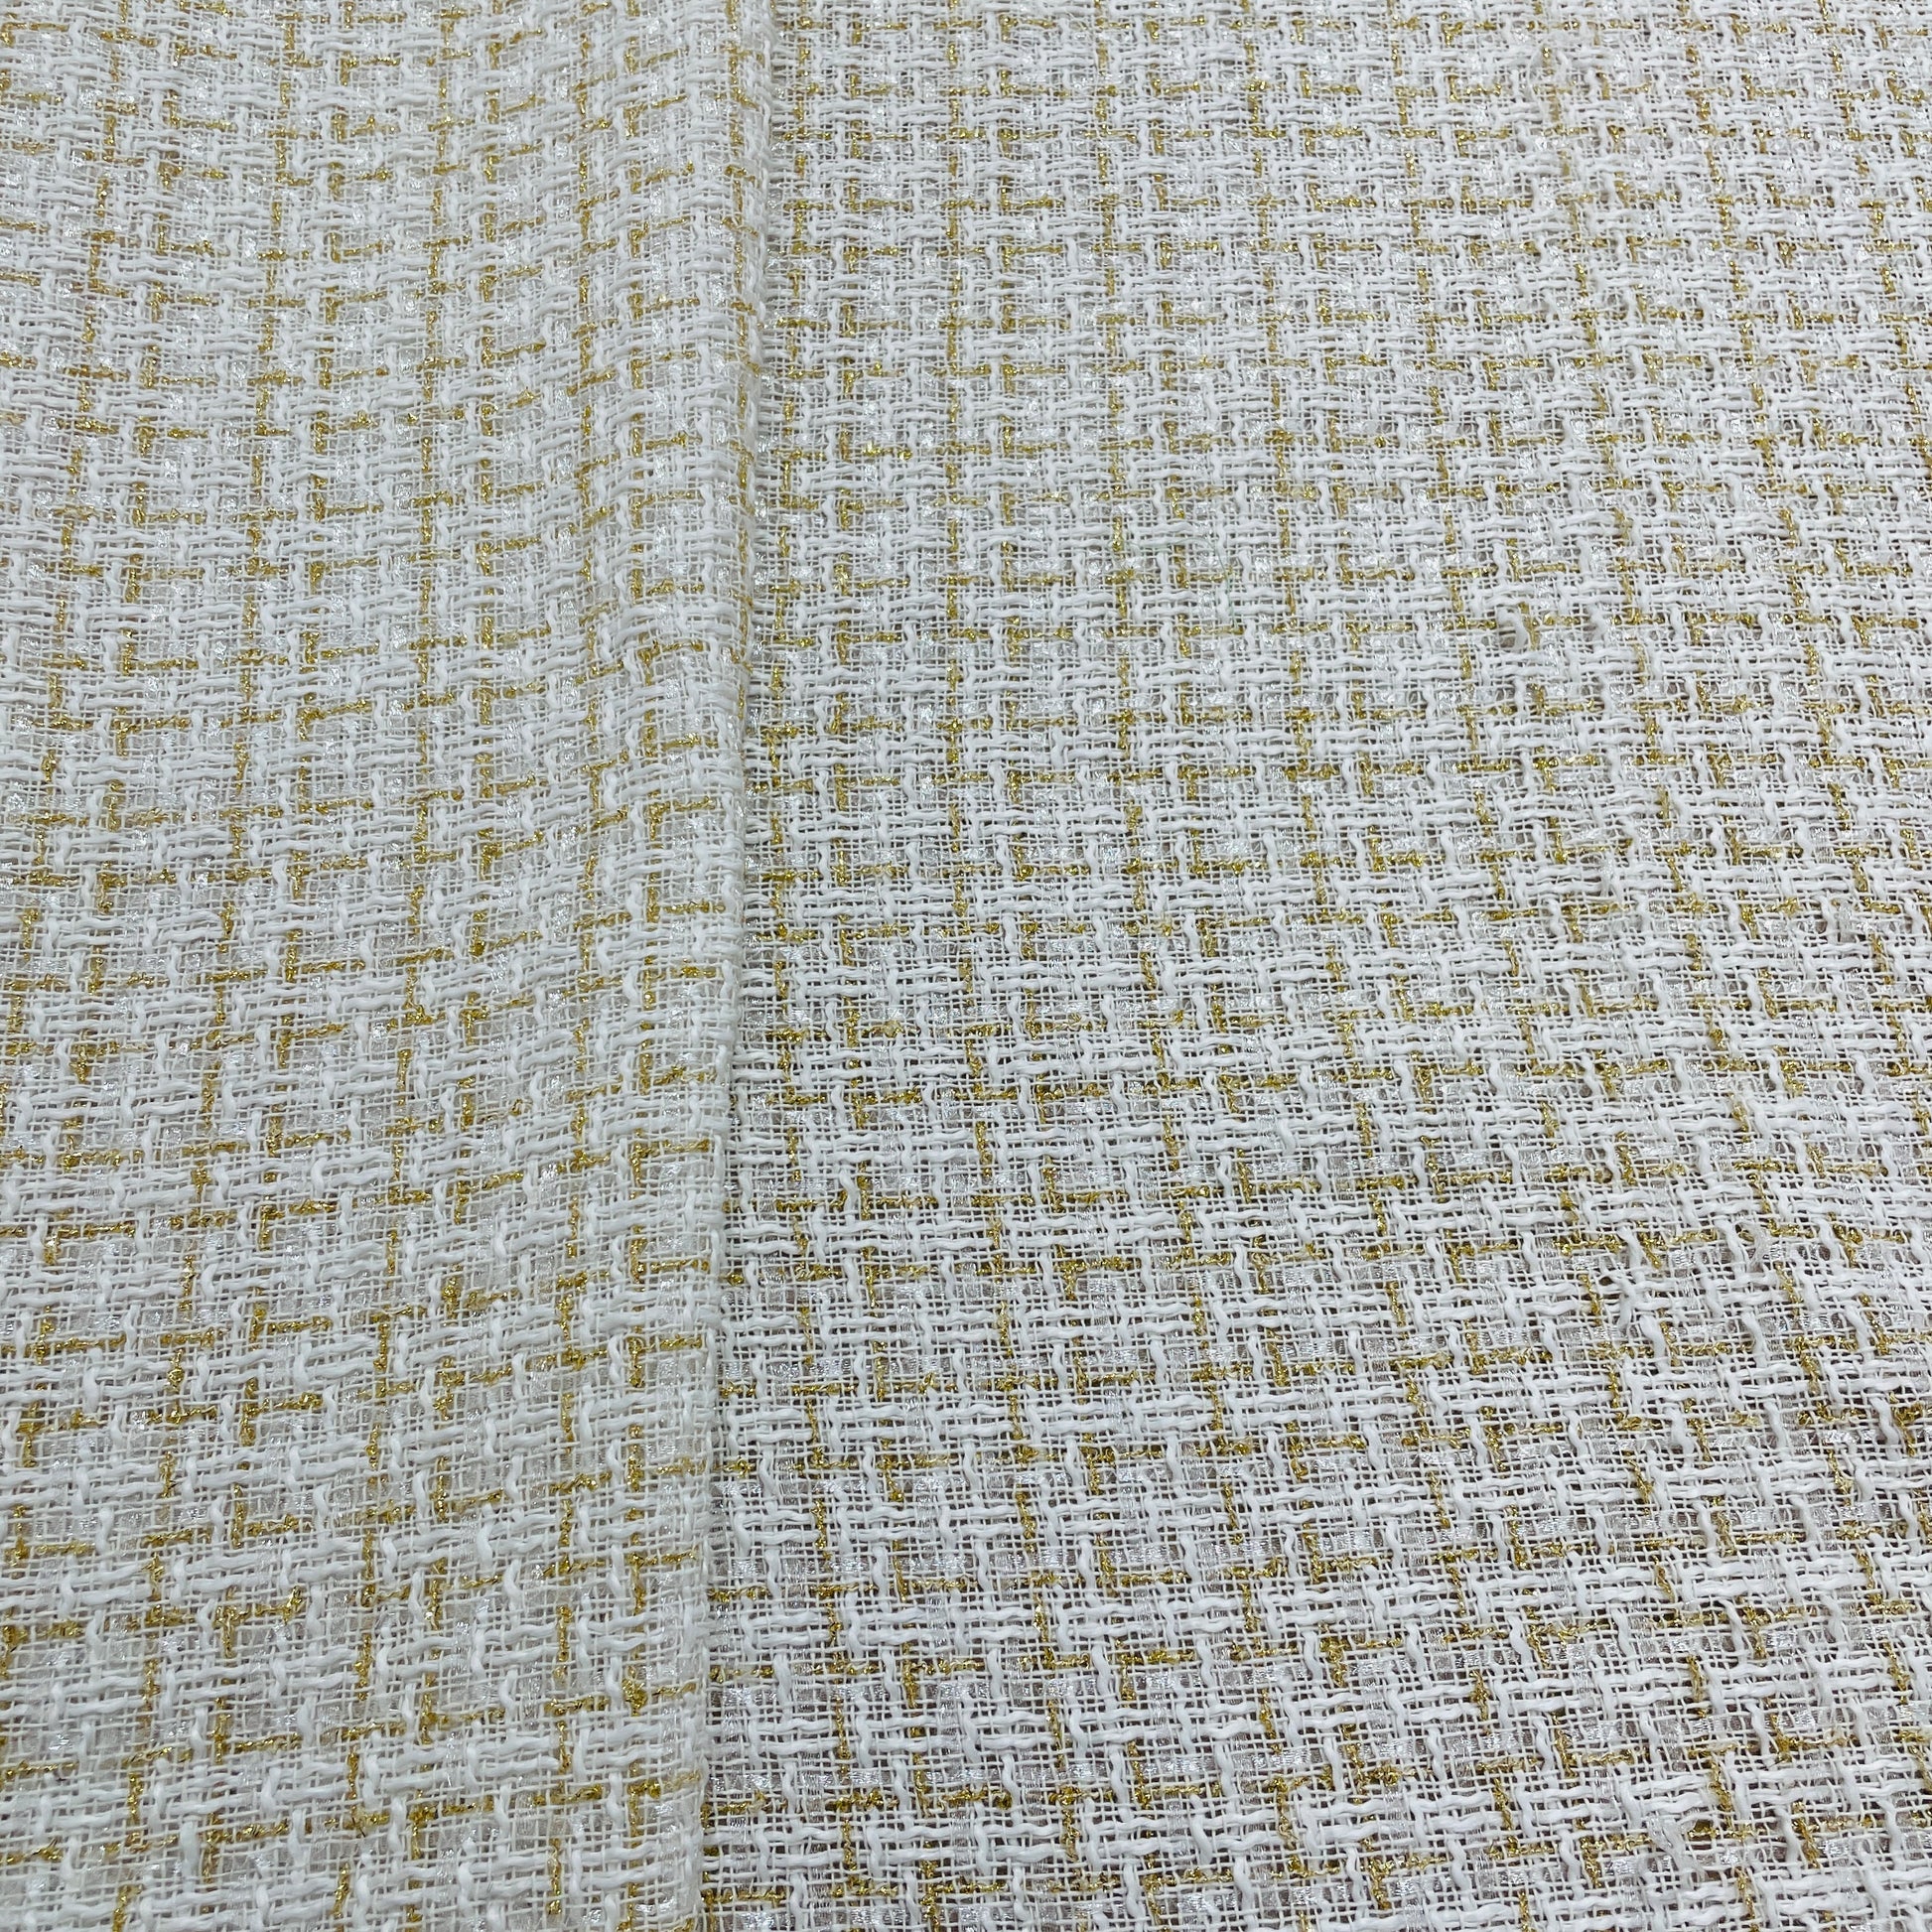 White Solid With Gold Lurex Tweed Fabric - TradeUNO